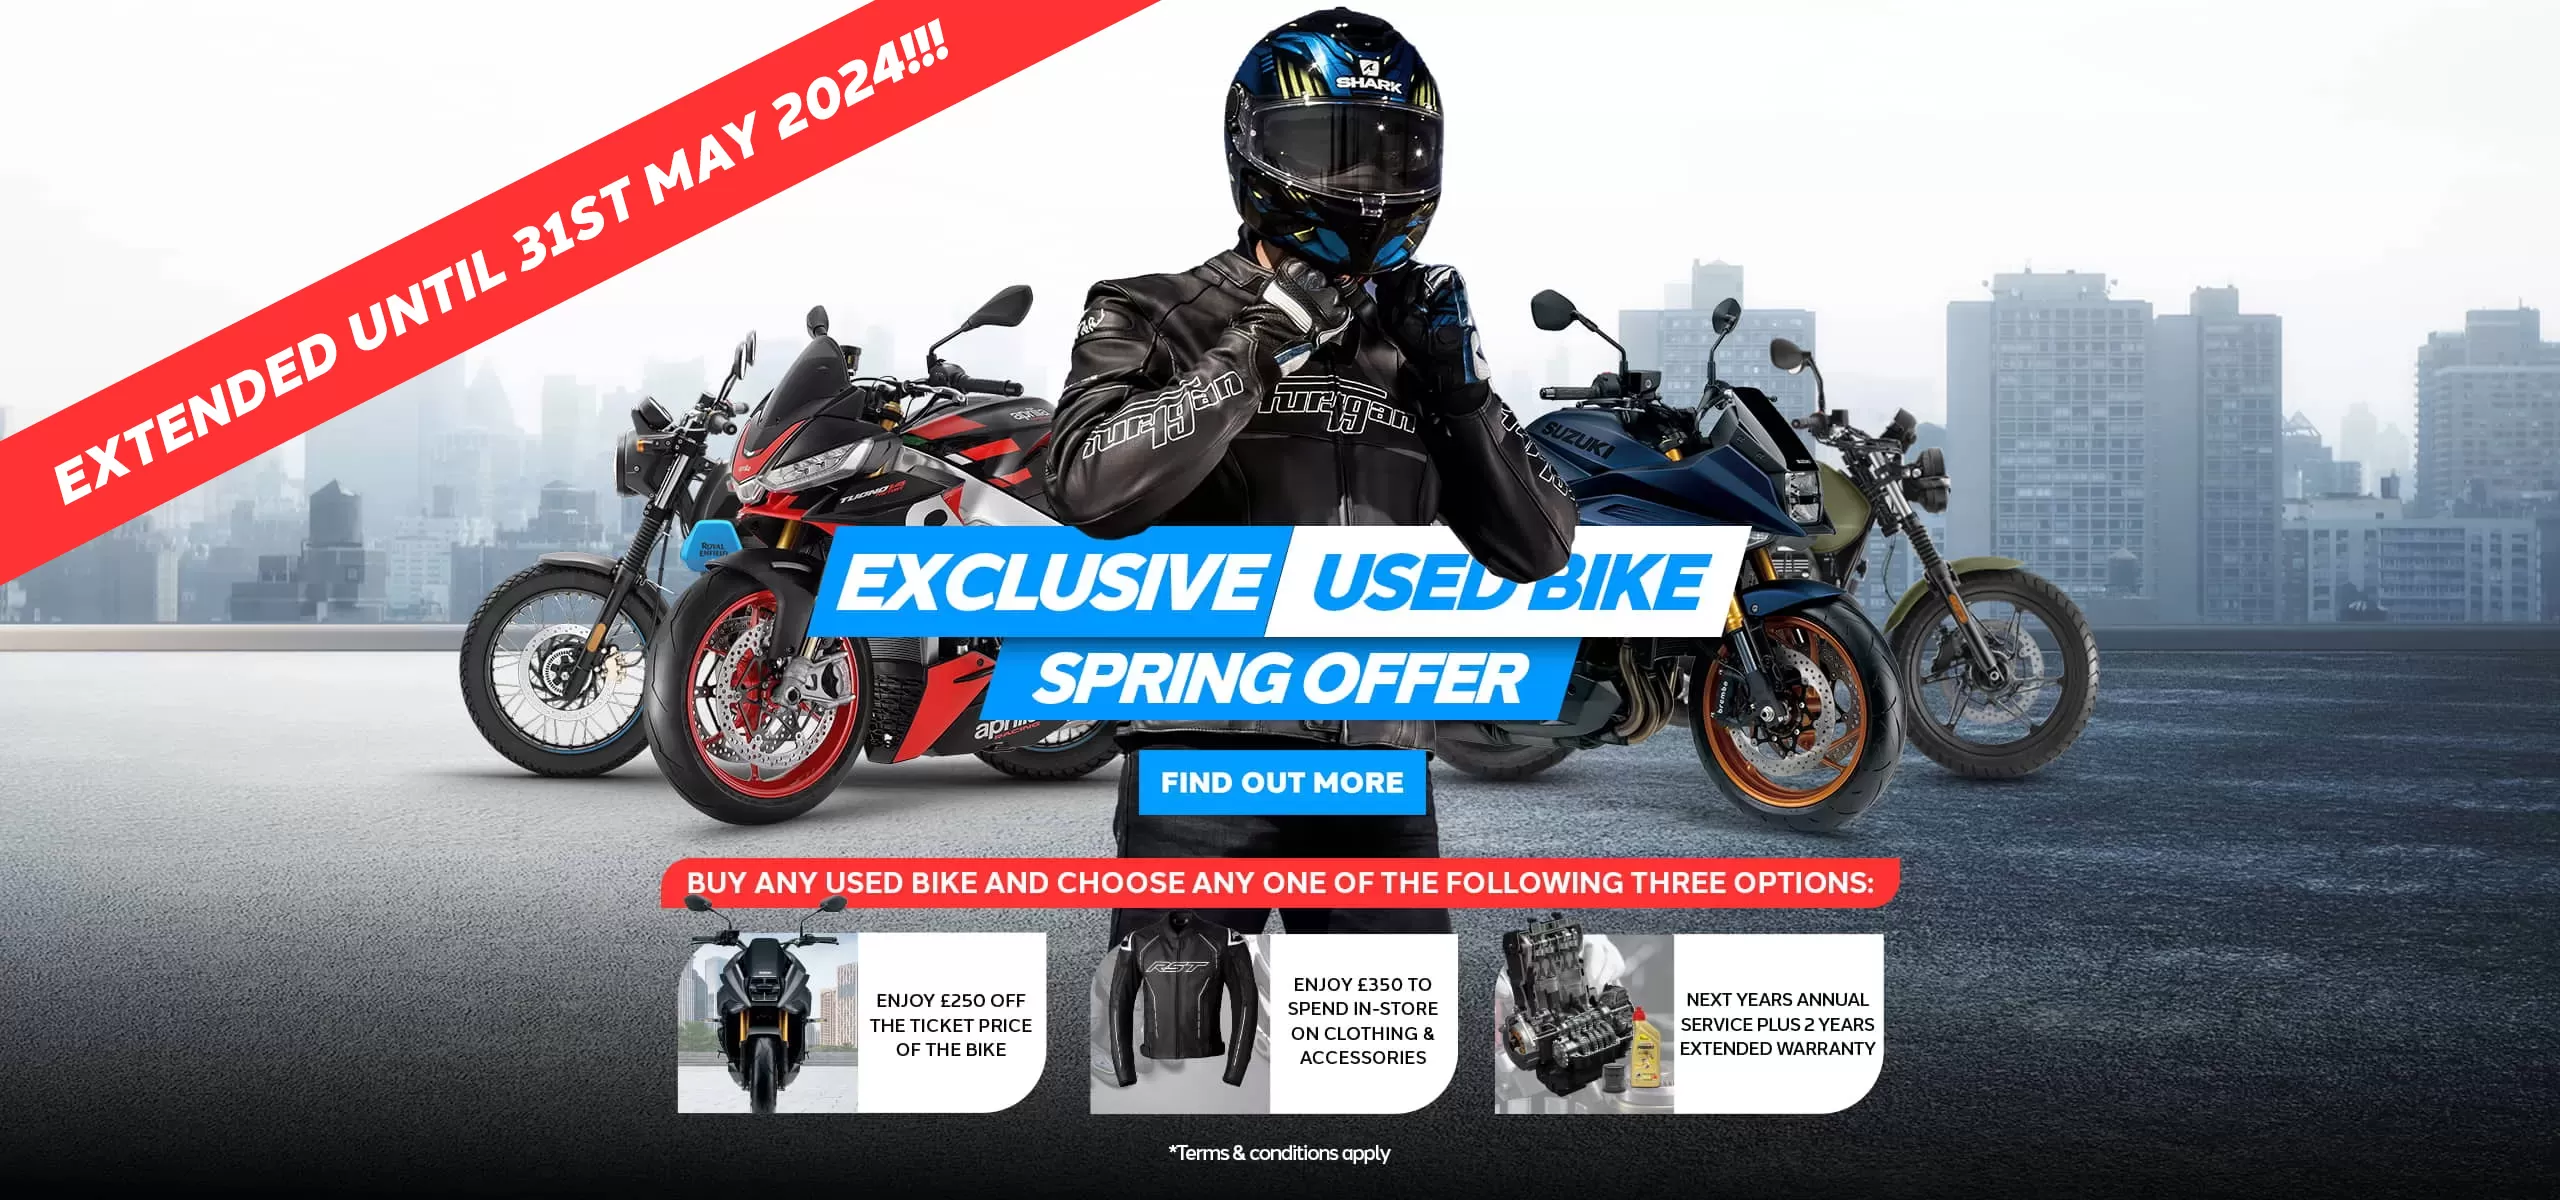 Exclusive Used Bike Spring Offer 3 options to choose from when buying a new bike